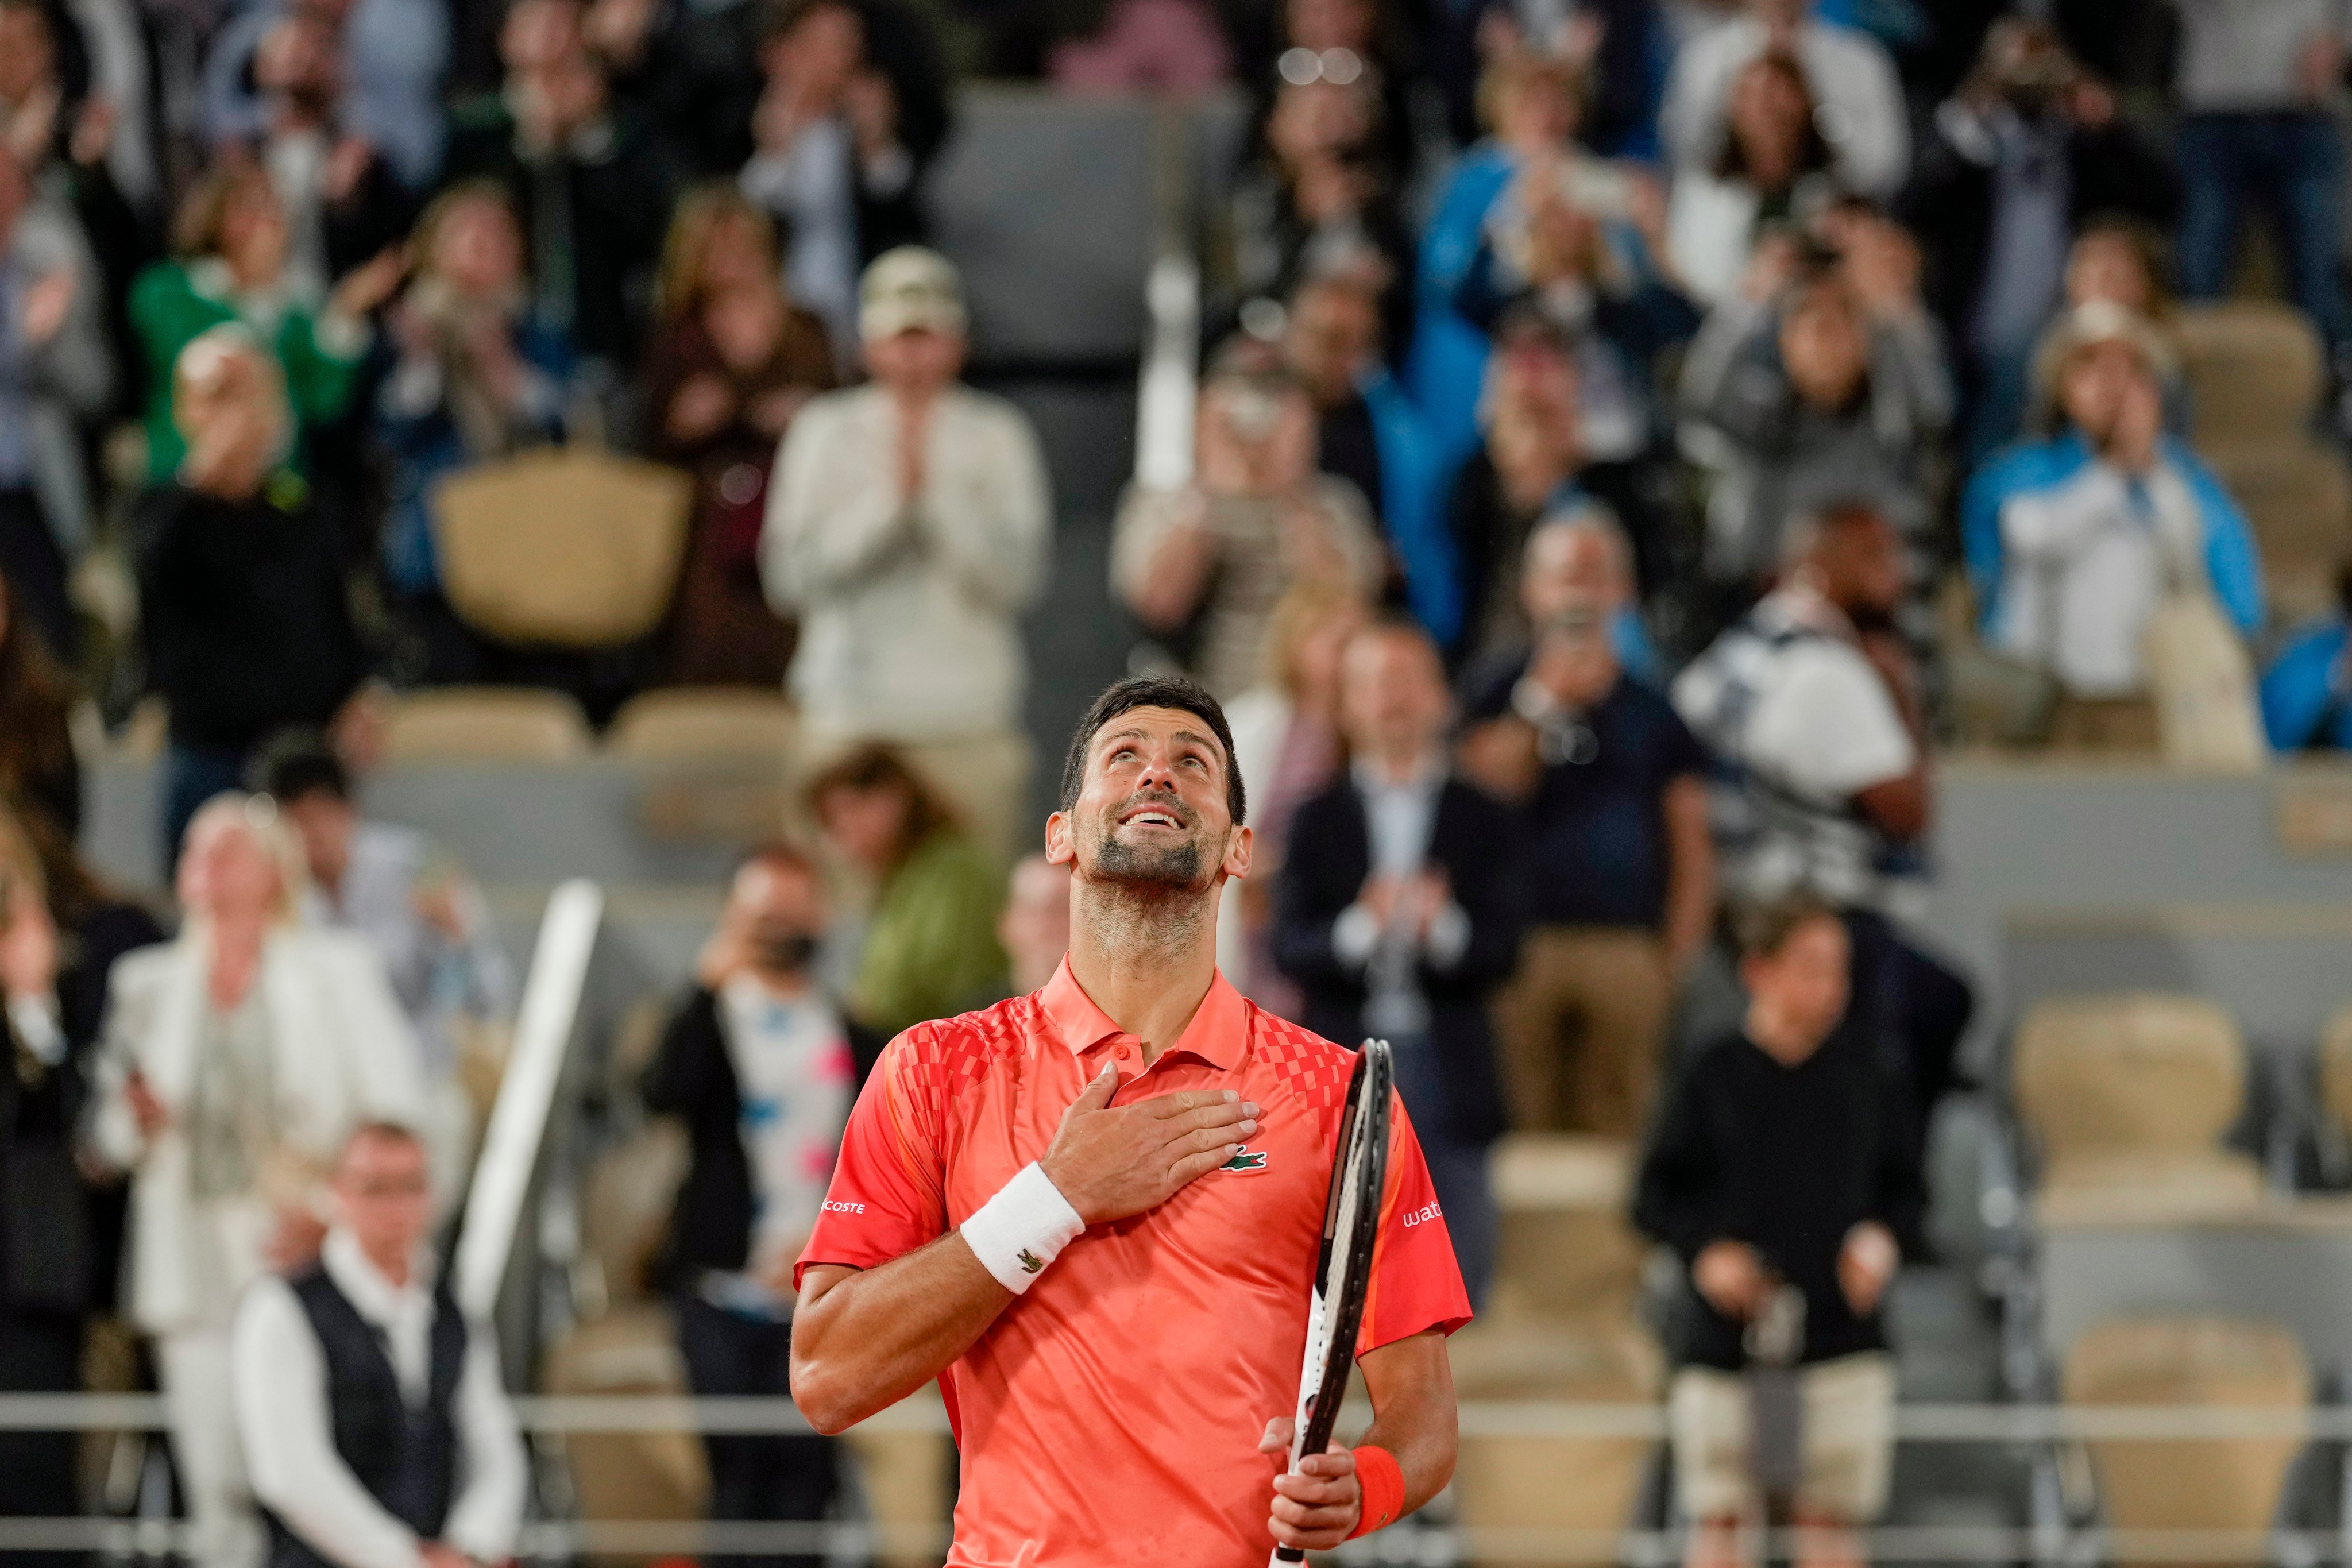 Novak Djokovic celebrates after beating Marton Fucsovics in the second round of the French Open. Photo: AP